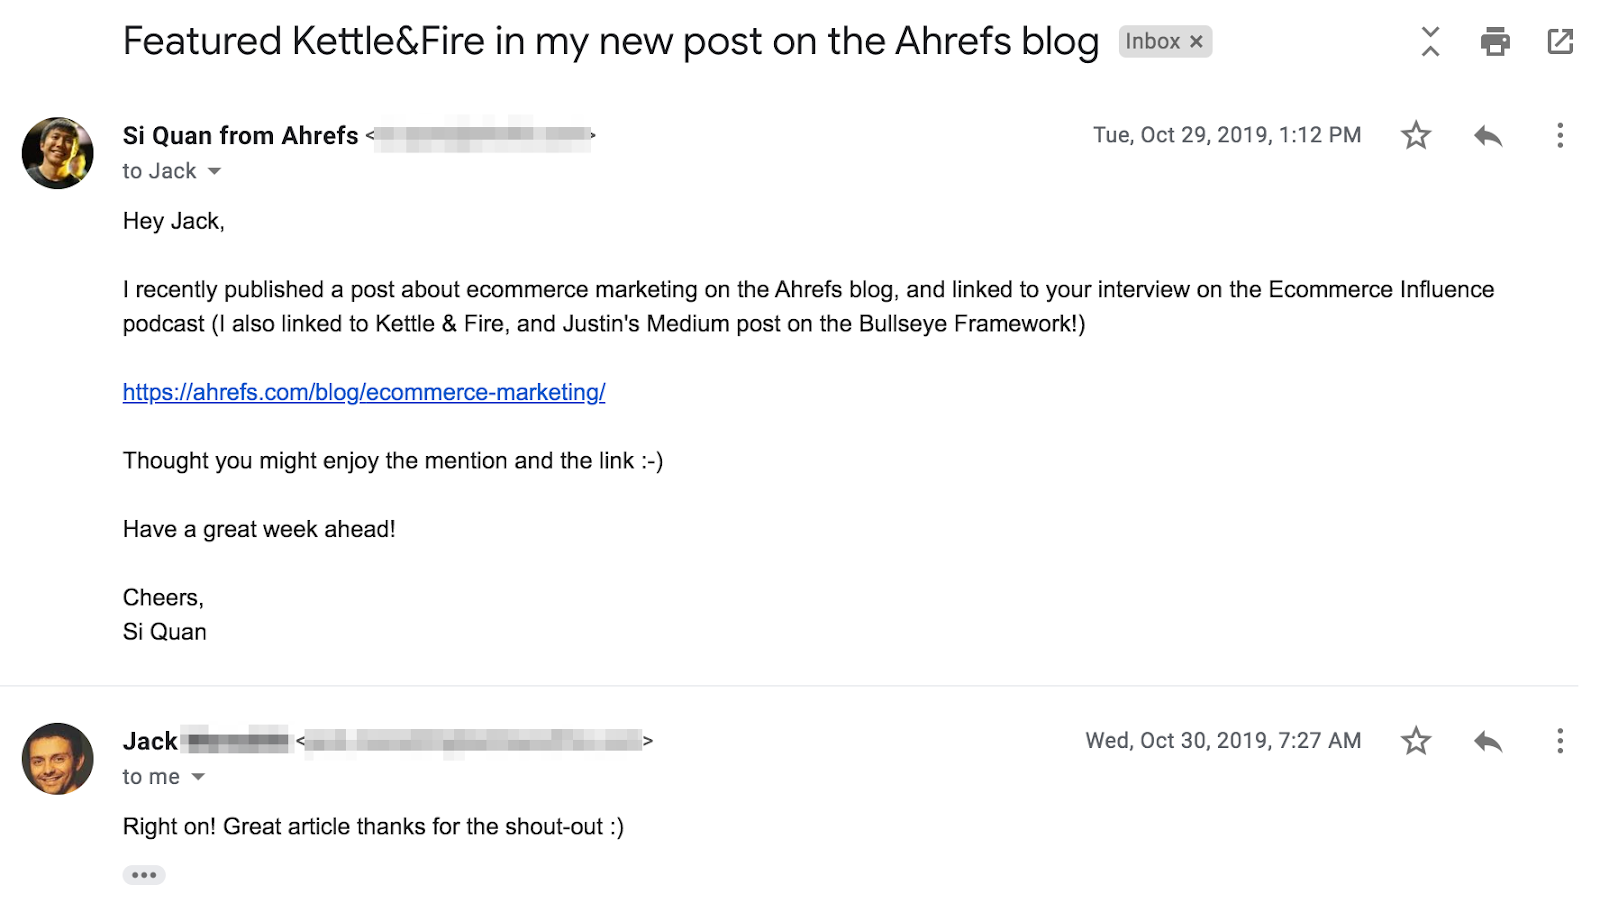 outreach email between Jack and Si Quan(Ahrefs)